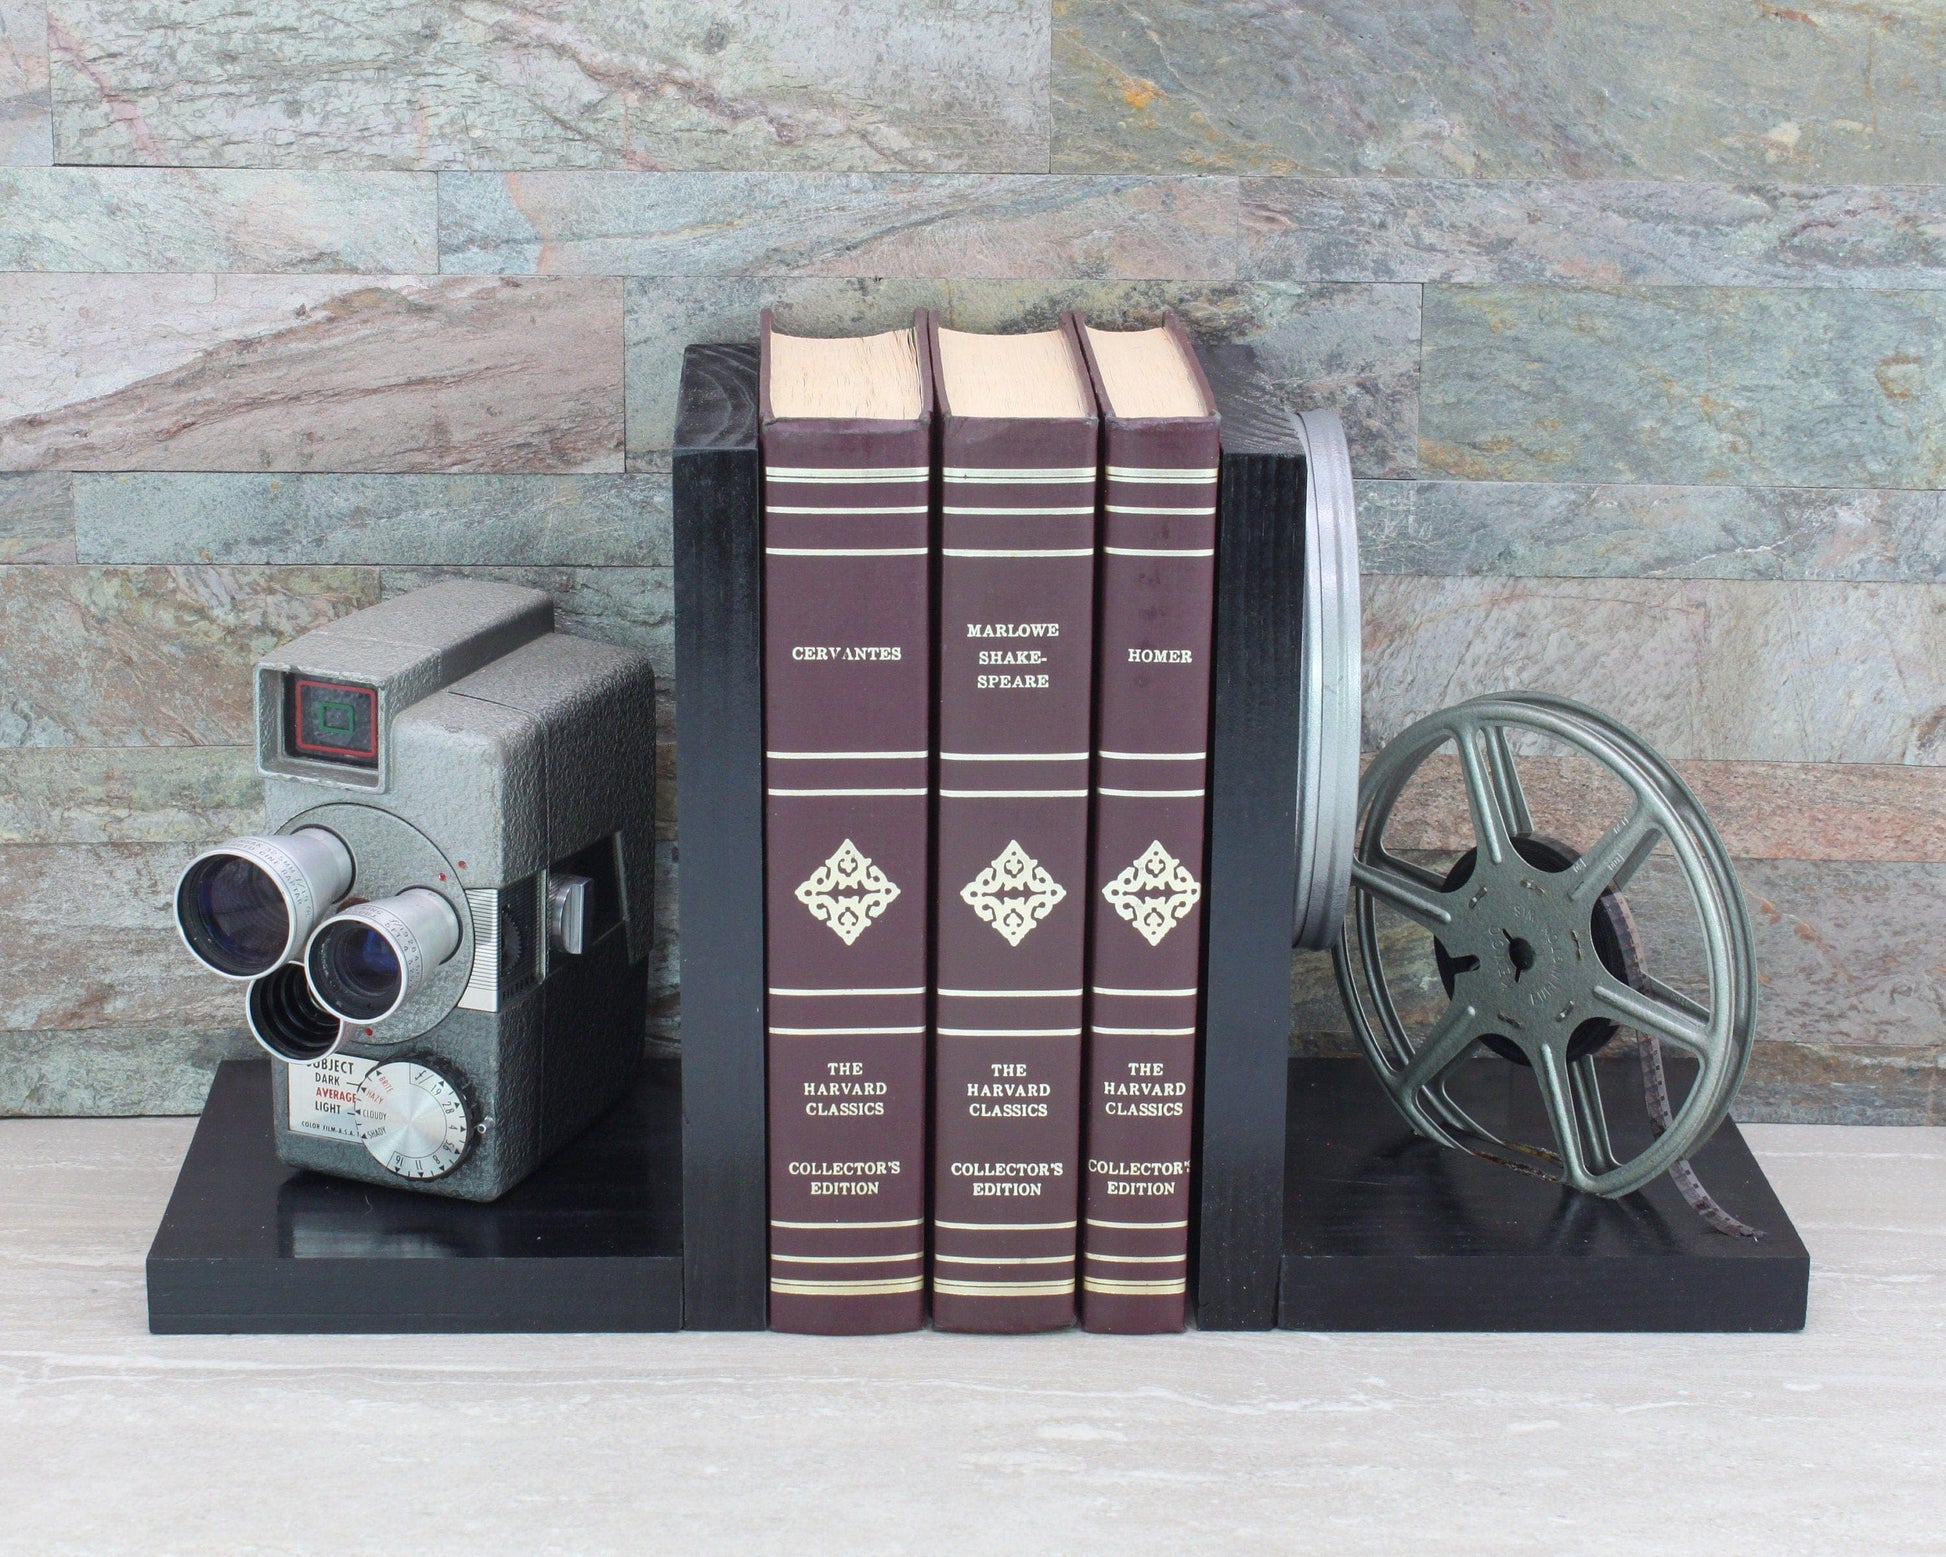 LightAndTimeArt Bookends Wollensak Model 43 Triple Turret Vintage Camera Bookends, DVD Holder, Movie Theater & Movie Room Decor, Film Maker, Actor and Actress gift